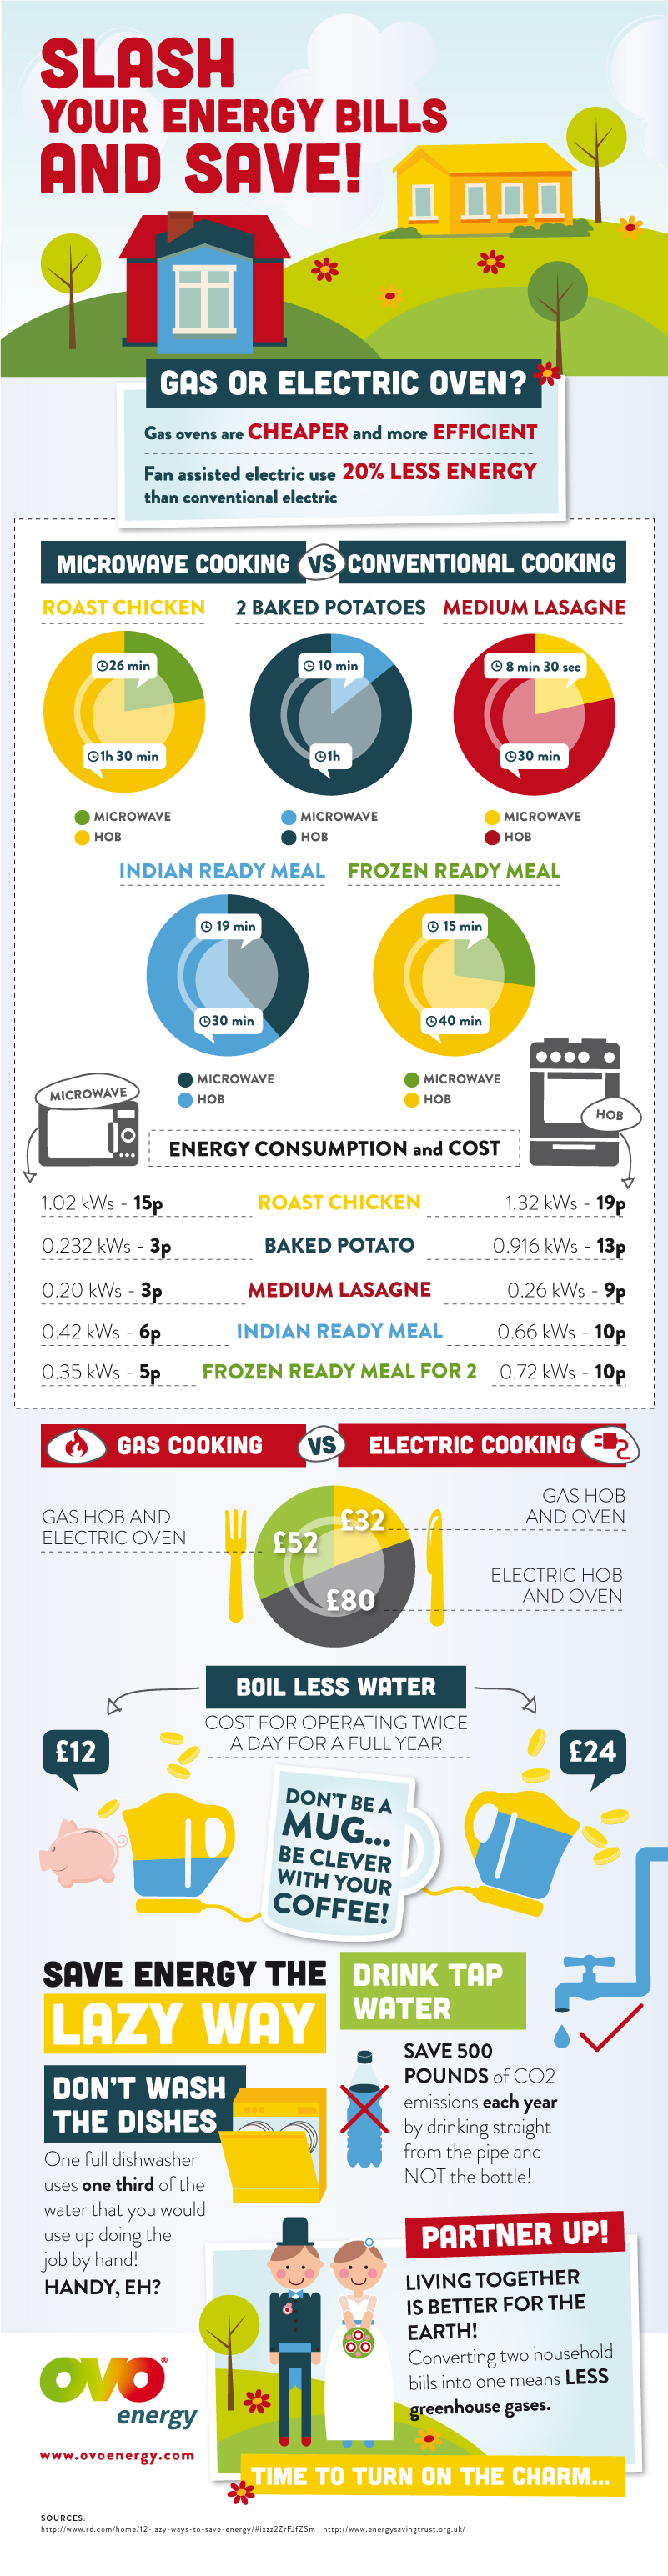 Saving Energy in the Home [Infographic]